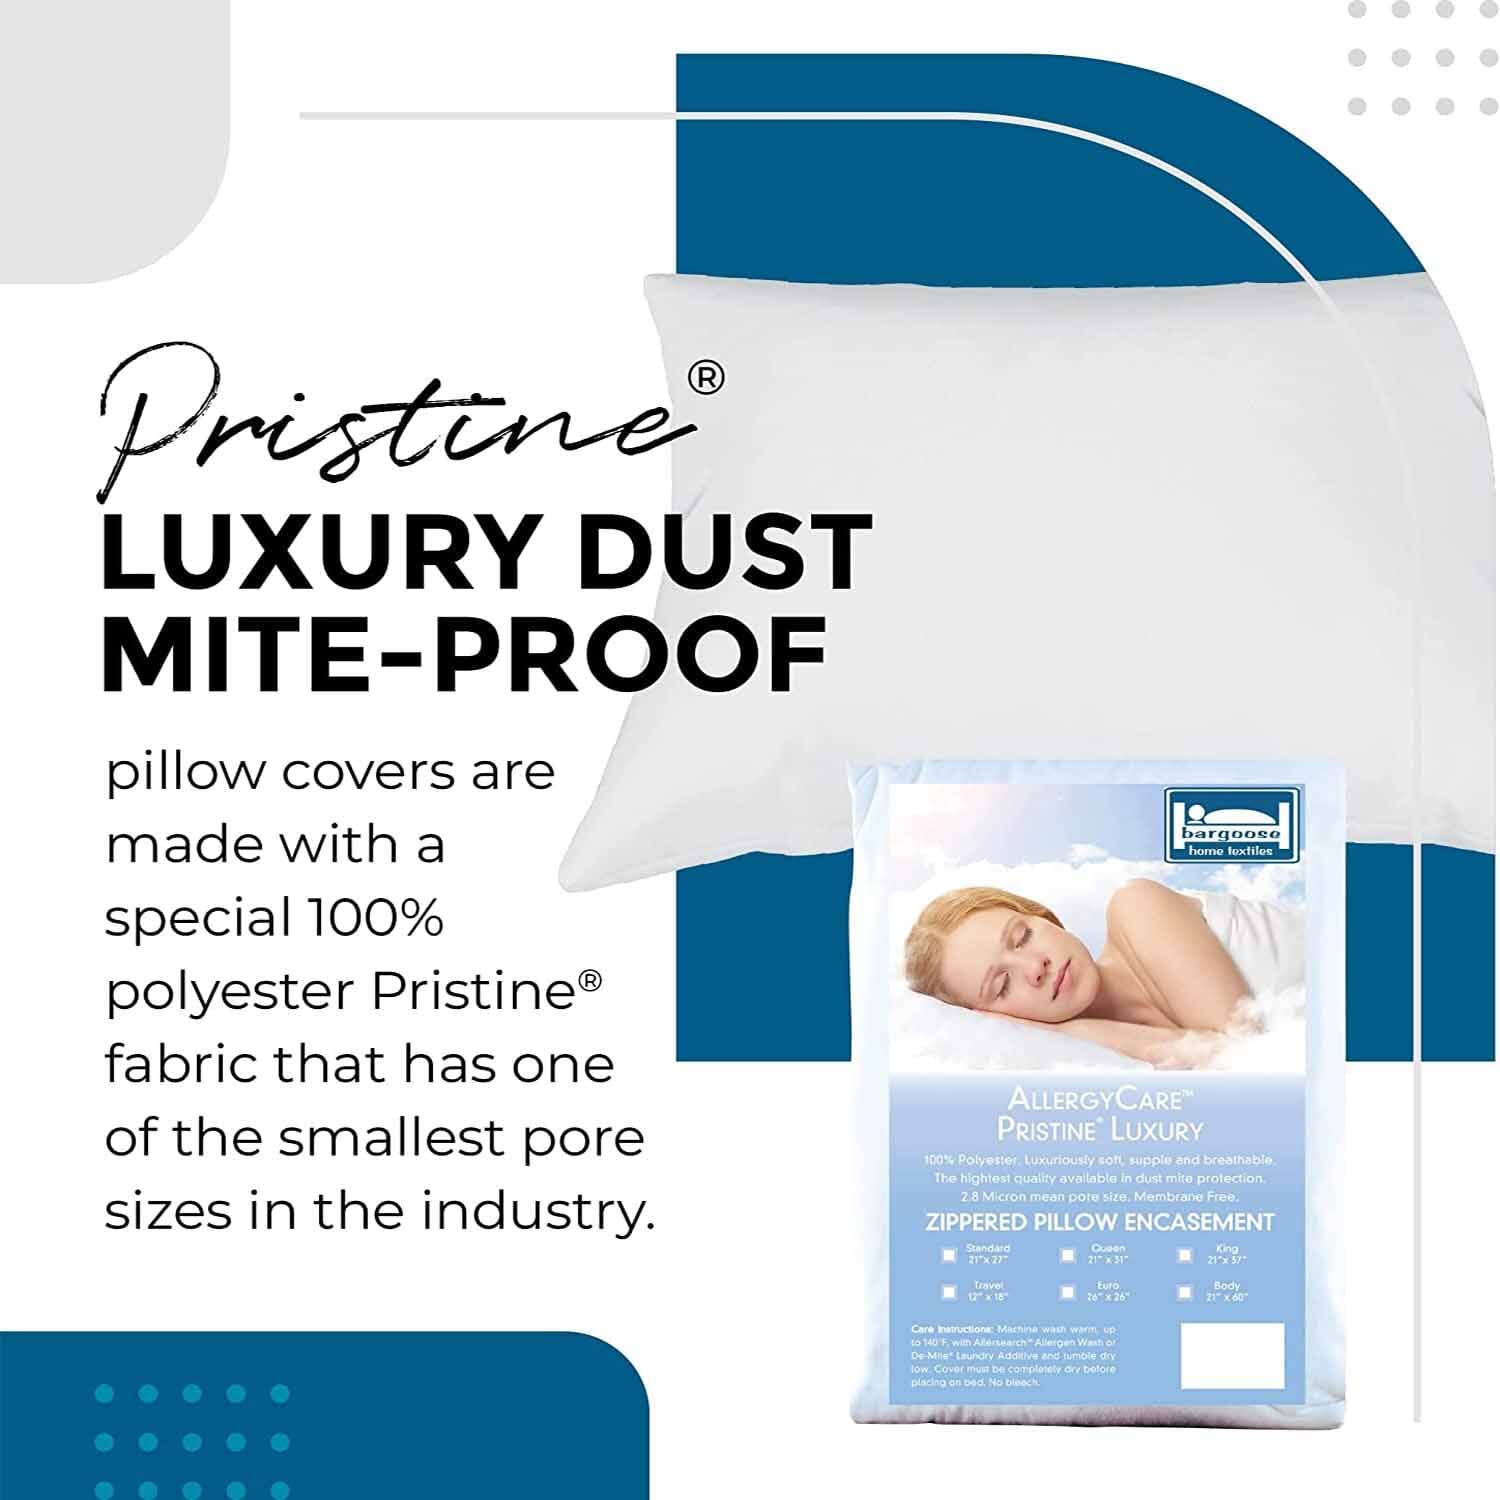 Pristine pillow covers fabric has one of the smallest pore sizes in the industry.